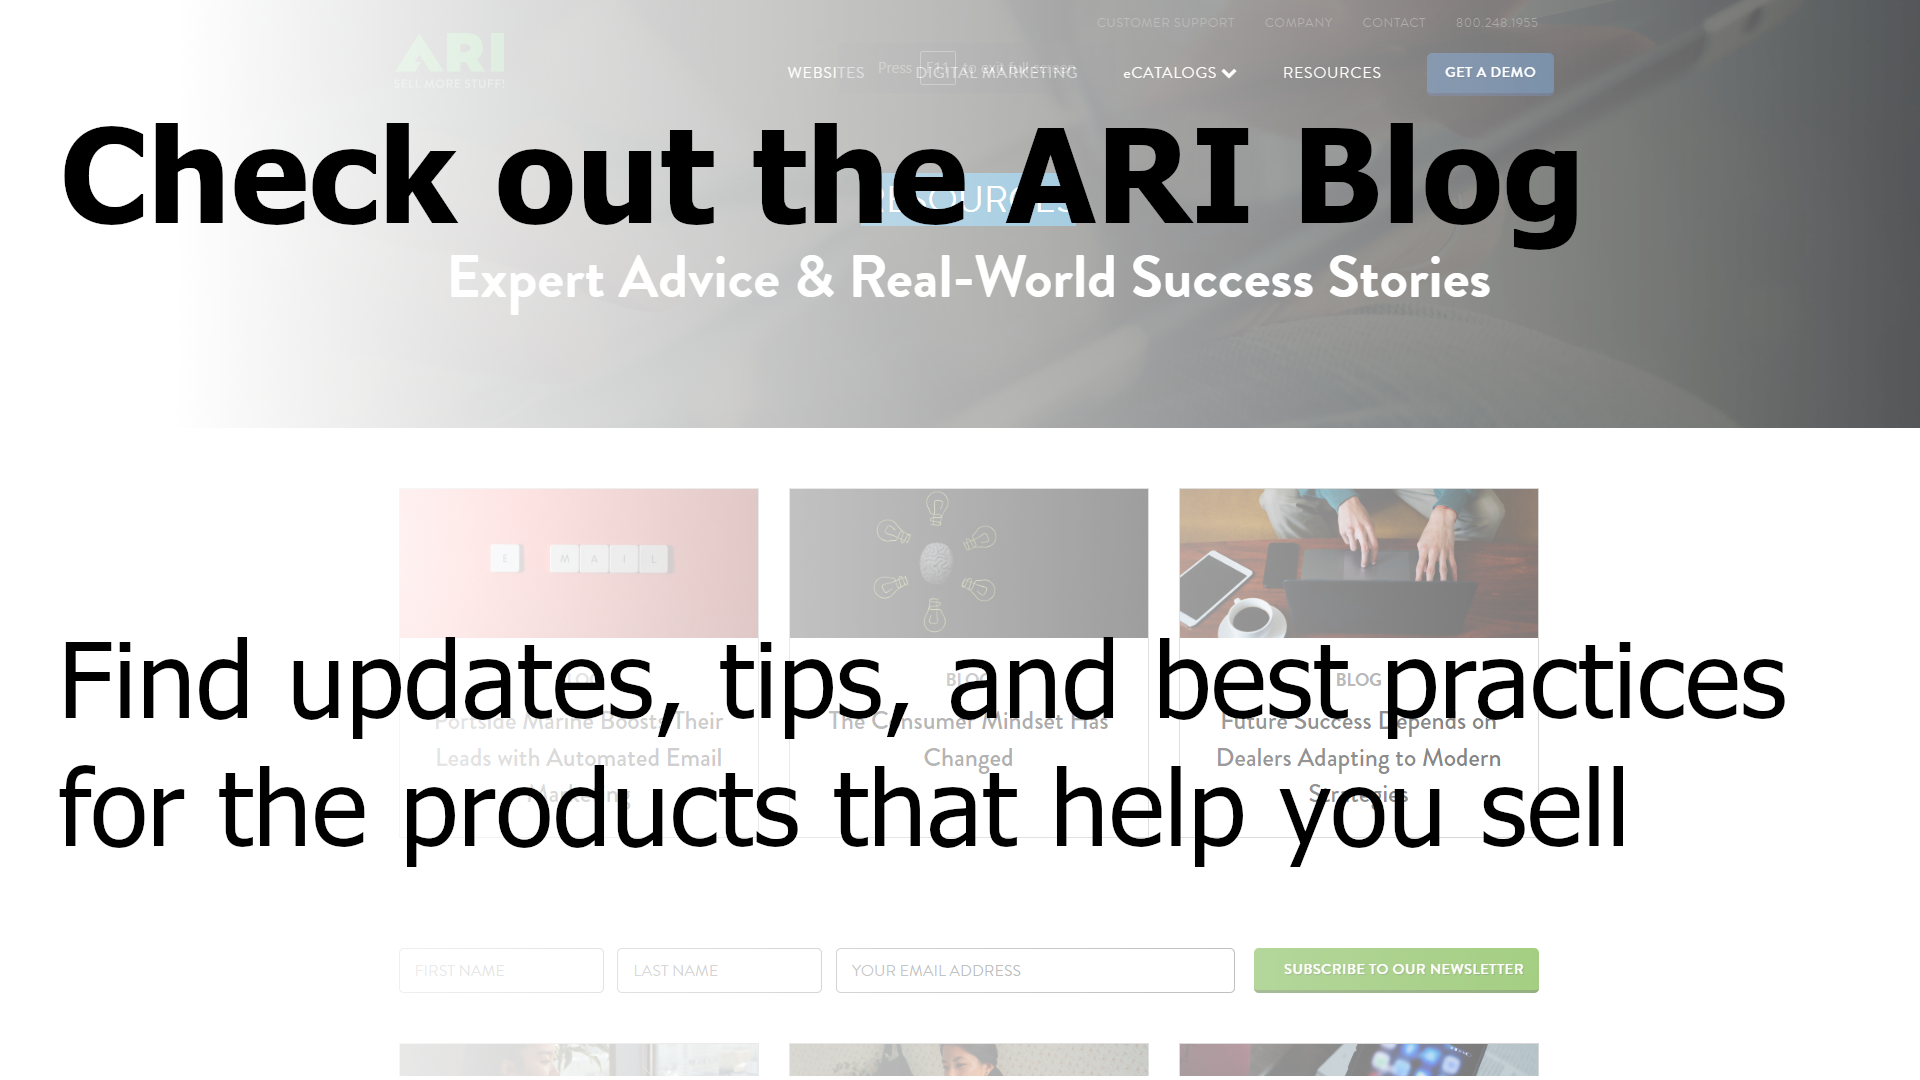 Learn best practices, tips and news on the ARI blog.